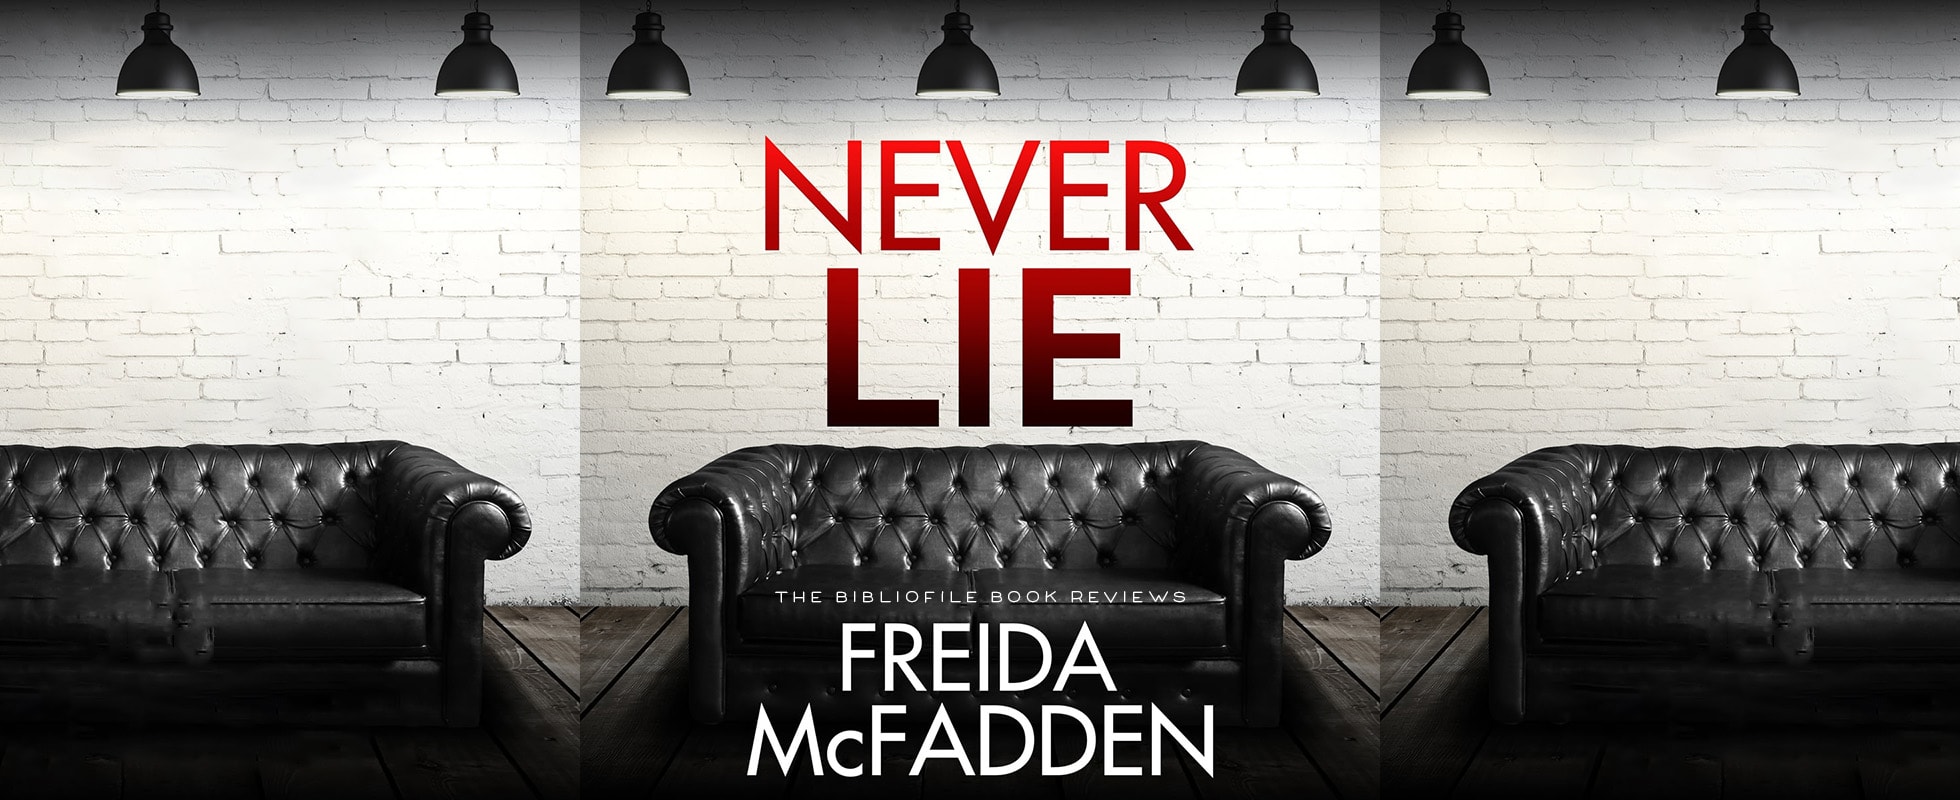 never lie by freida mcfadden book review plot summary synopsis recap discussion spoilers